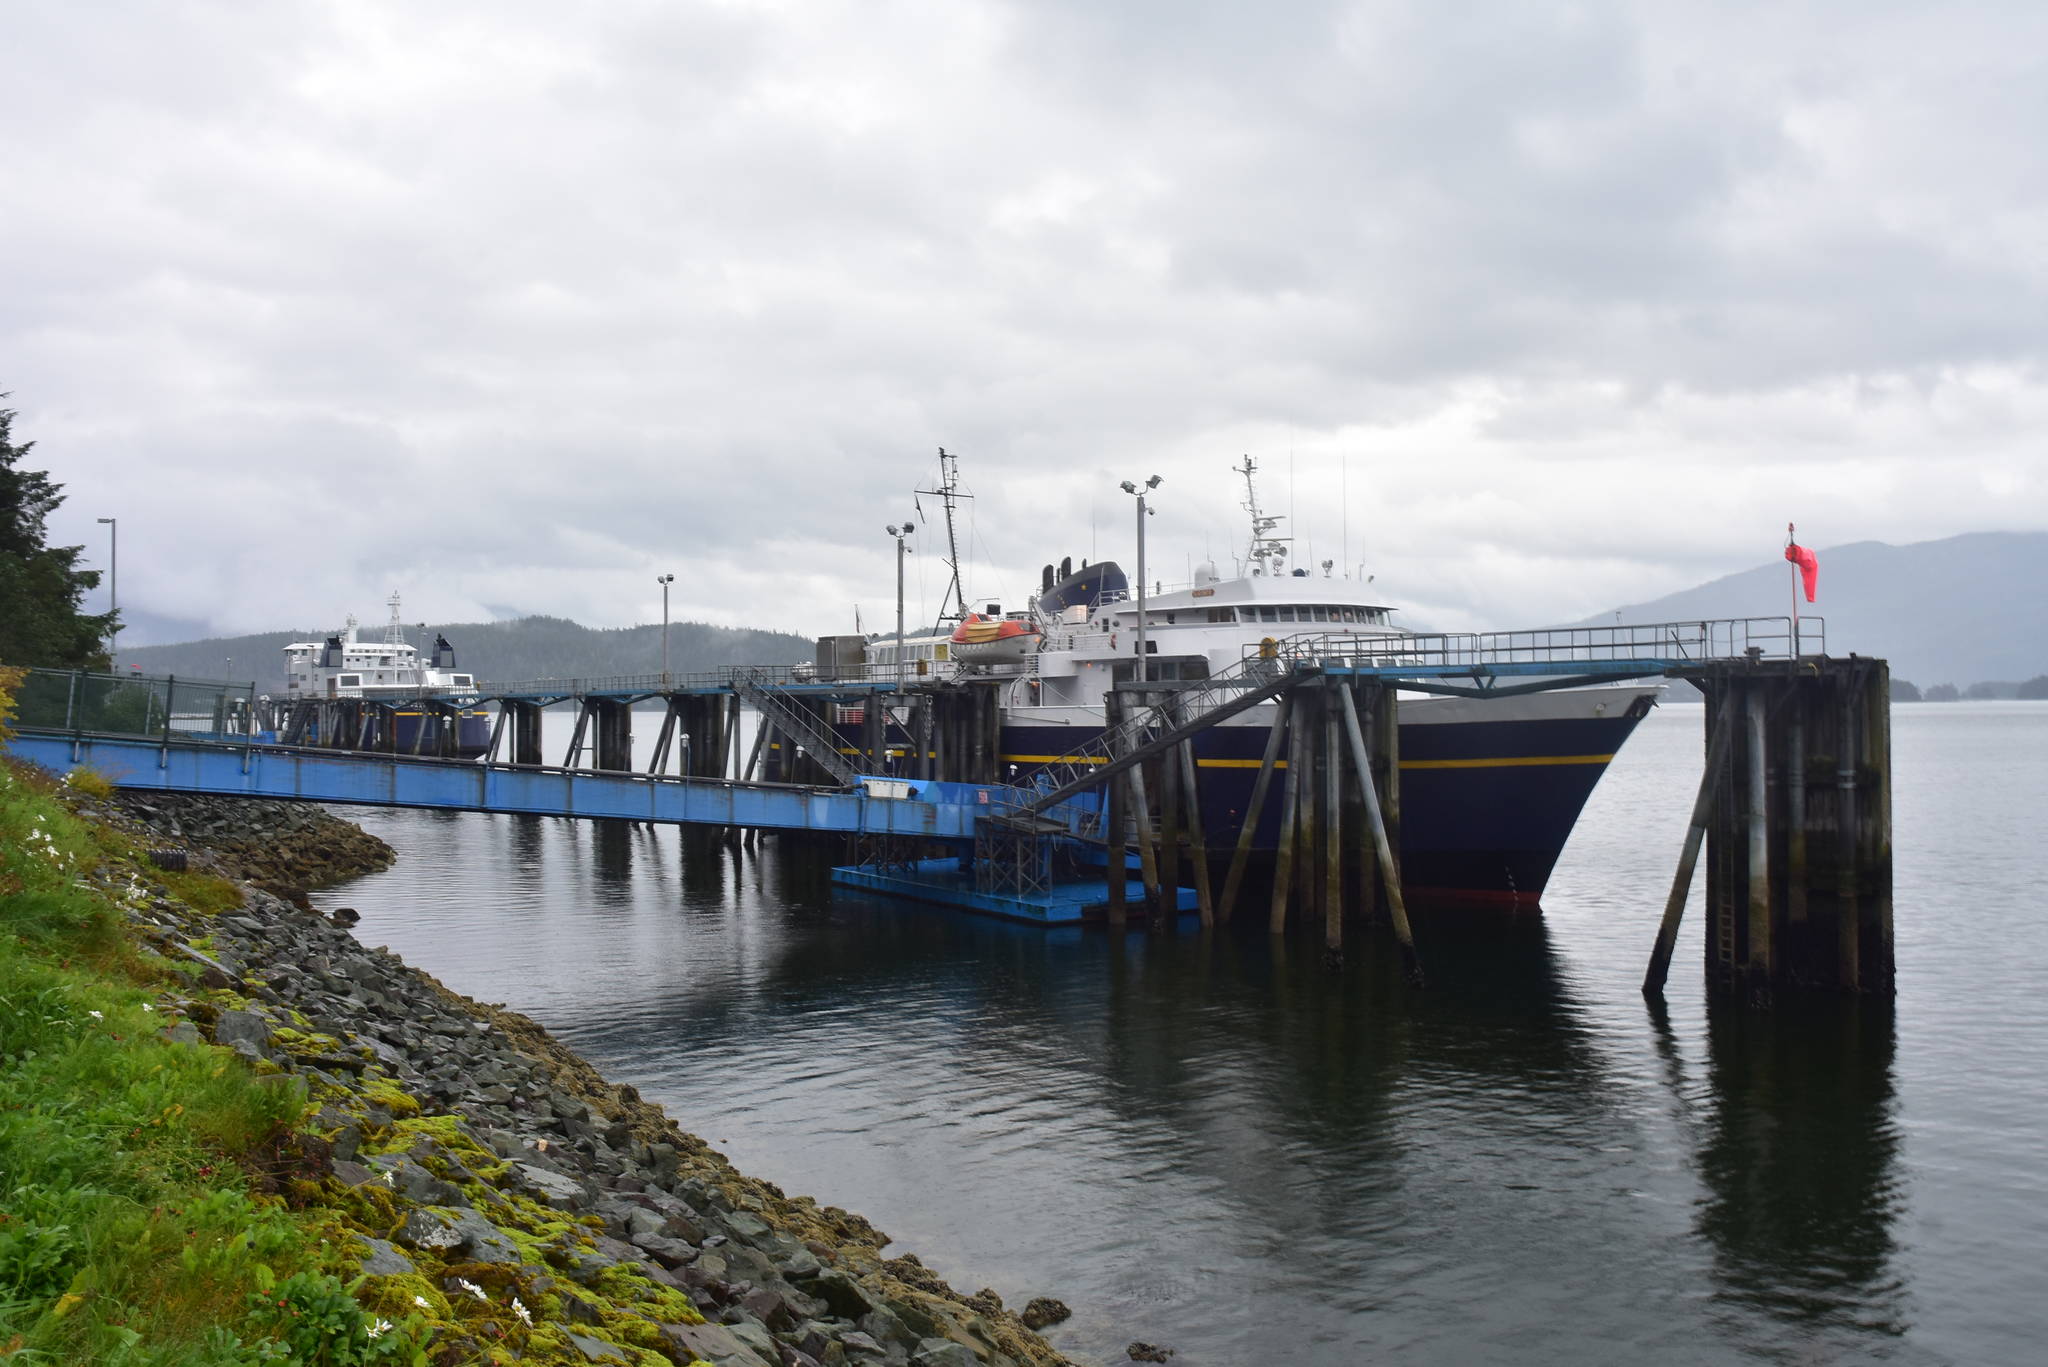 The MV LeConte docks at the Auke Bay Ferry Terminal with the Tazlina in the background on Monday, Aug. 10, 2020. The LeConte was present in Juneau when a bomb threat was made against it Wednesday, Feb. 10, 2021, according to the Juneau Police Department. (Peter Segall / Juneau Empire File)